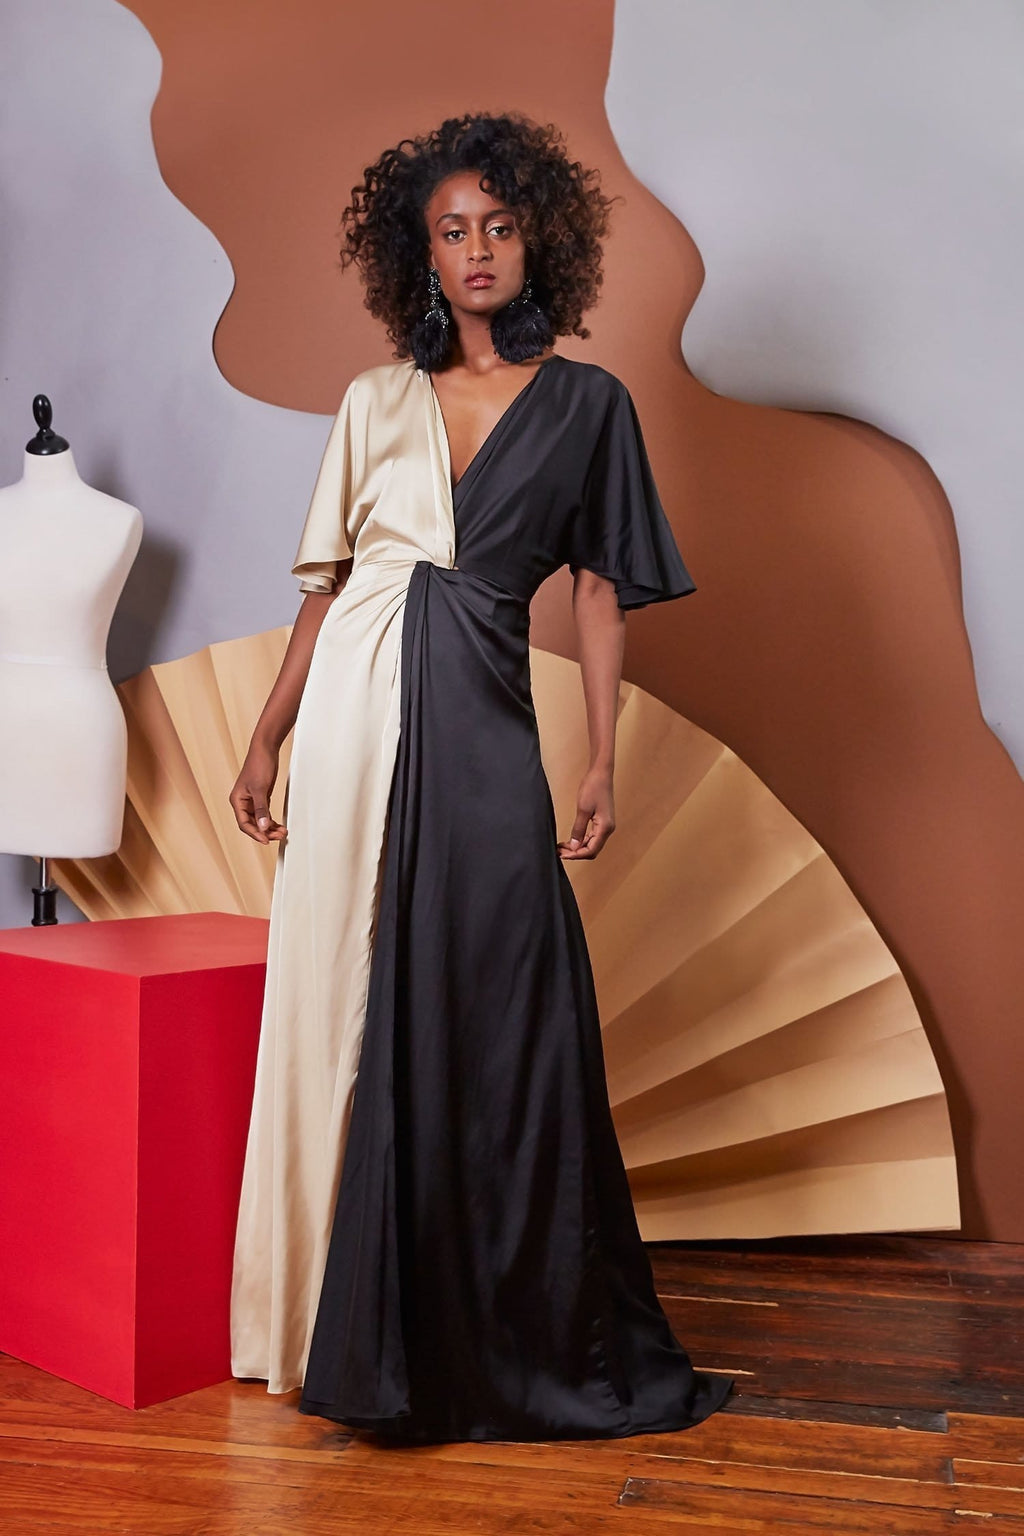 Lavanya Coodly Apparel & Accessories > Clothing > Dresses XS / Gold/Black Lavanya Coodly Women's Madison Gown in Pale Gold & Black Color Blocked Satin & Butterfly Sleeves